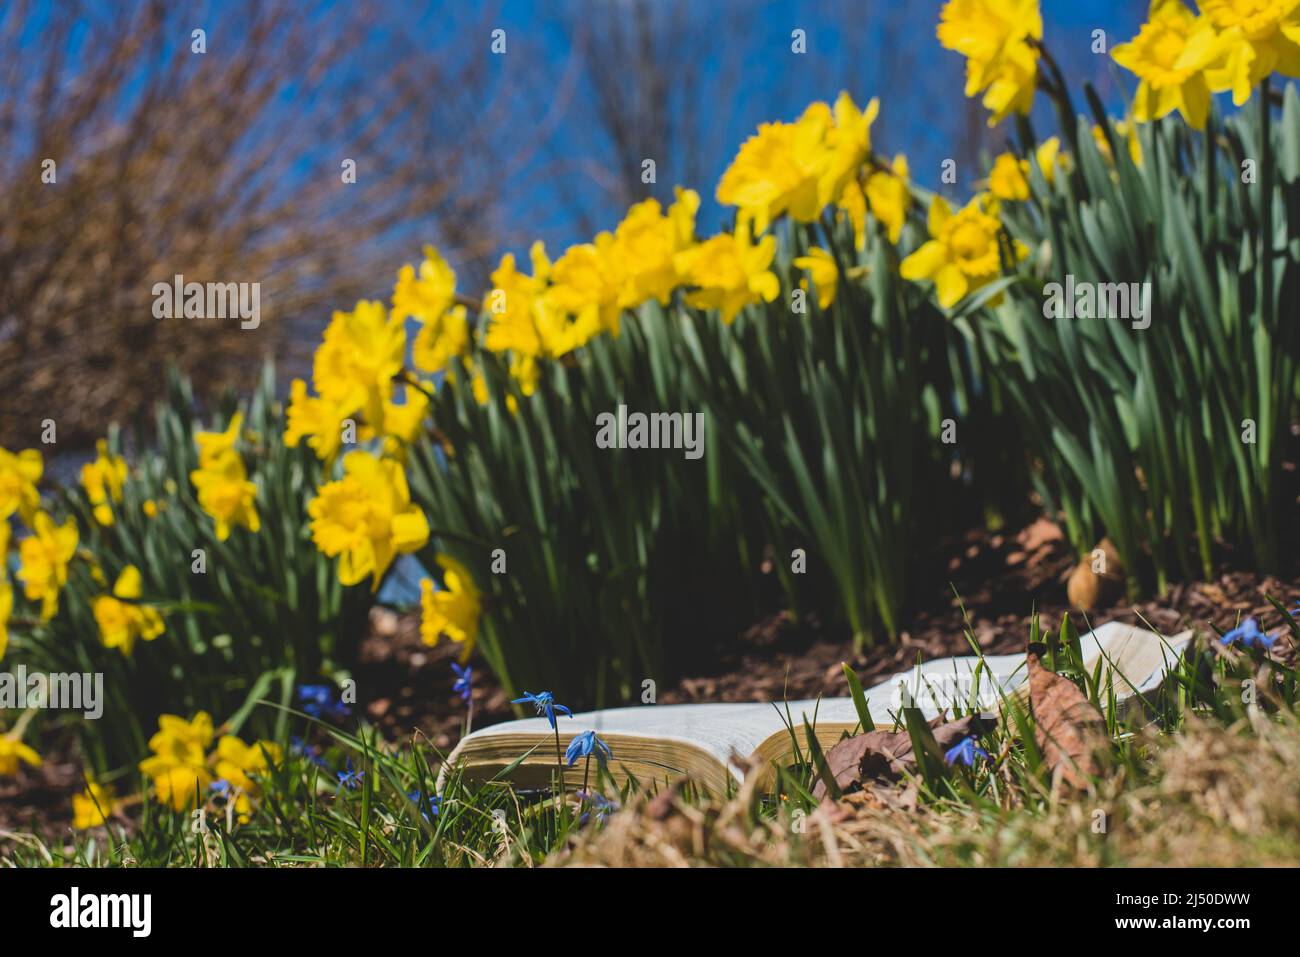 A book next to a bunch of daffodils on a warm spring day. Stock Photo